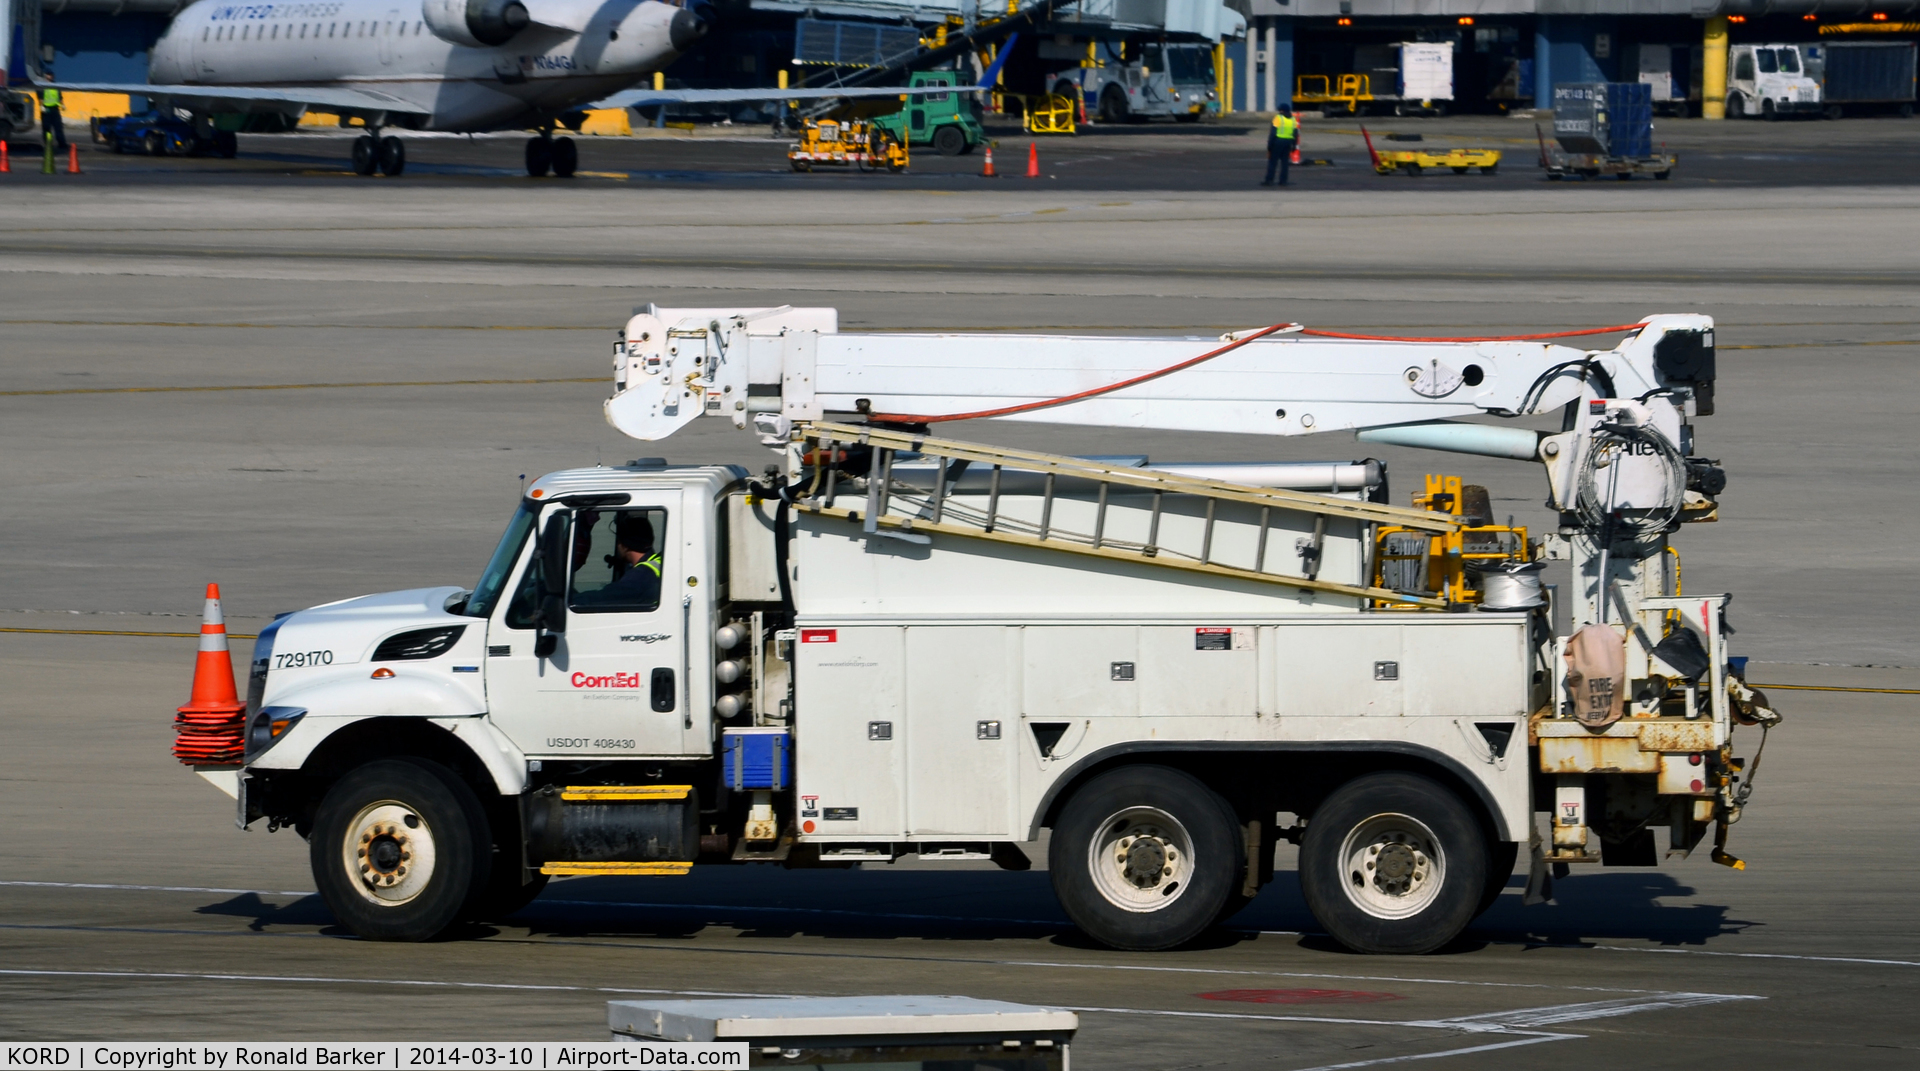 Chicago O'hare International Airport (ORD) - Deicing truck at O'Hare